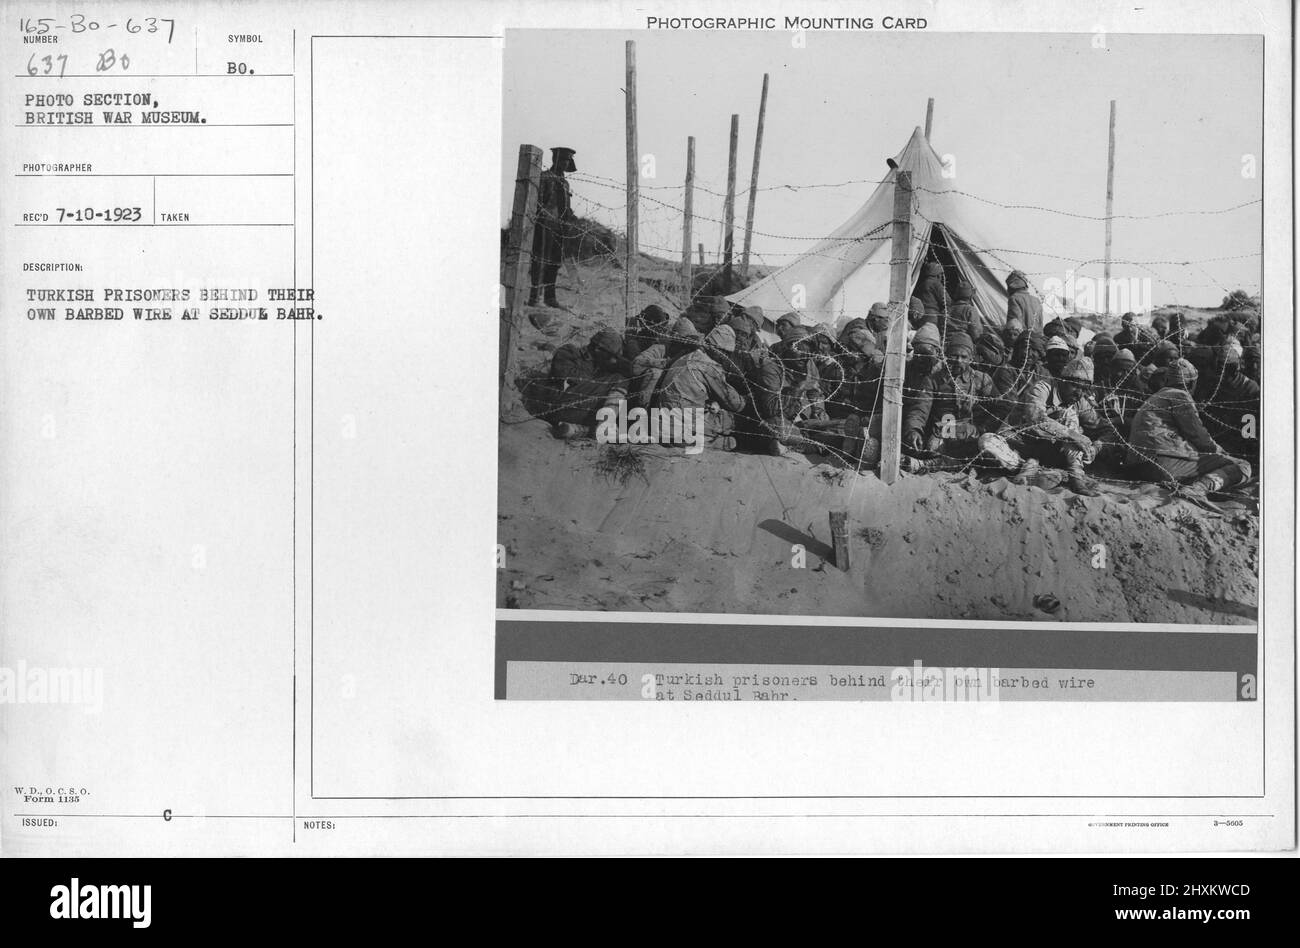 Turkish prisoner behind their own barbed wire at Seddul Bahr Collection of World War I Photographs, 1914-1918 that depict the military activities of British and other nation's armed forces and personnel during World War I. Stock Photo